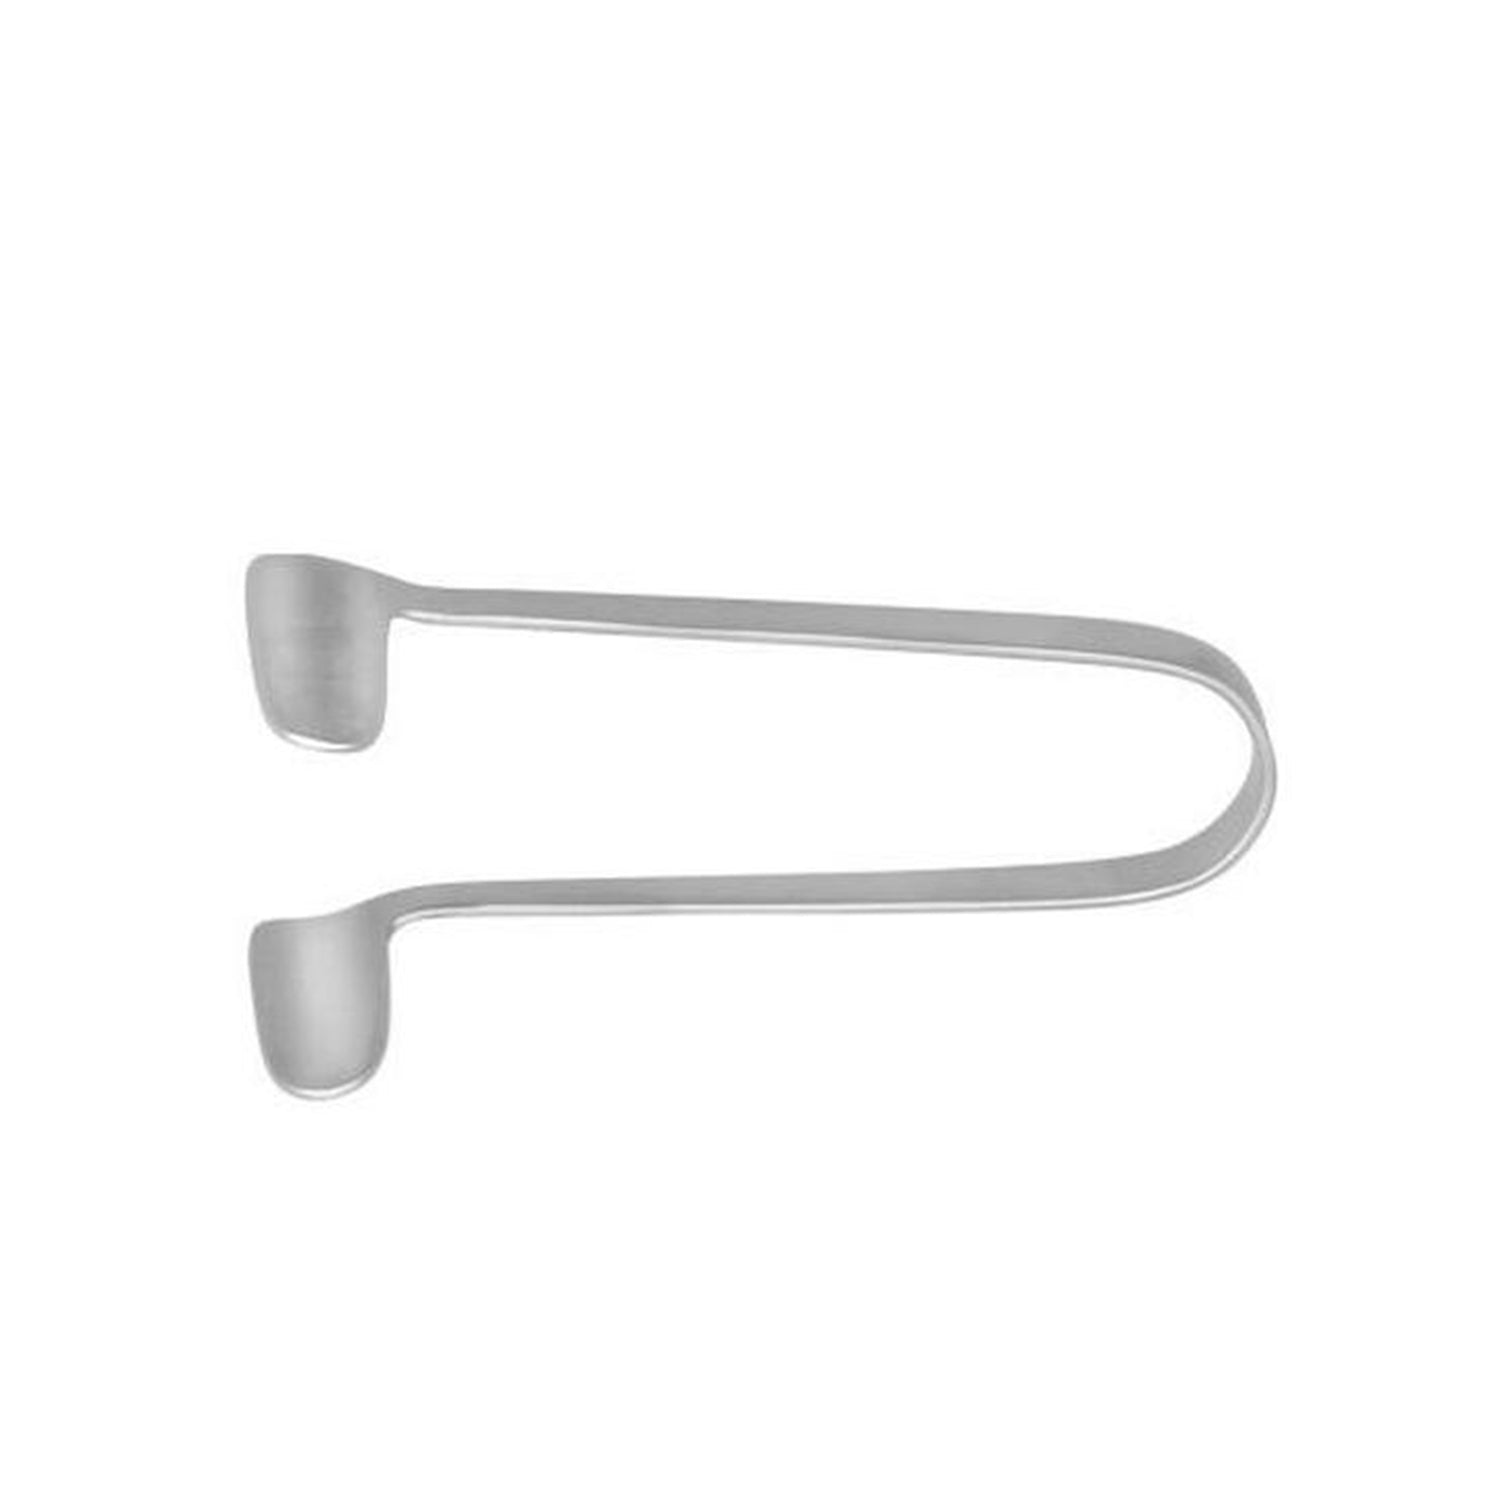 Instrapac Thudichum Nasal Speculum | Size 5 | Single Use | Pack of 40 (3)